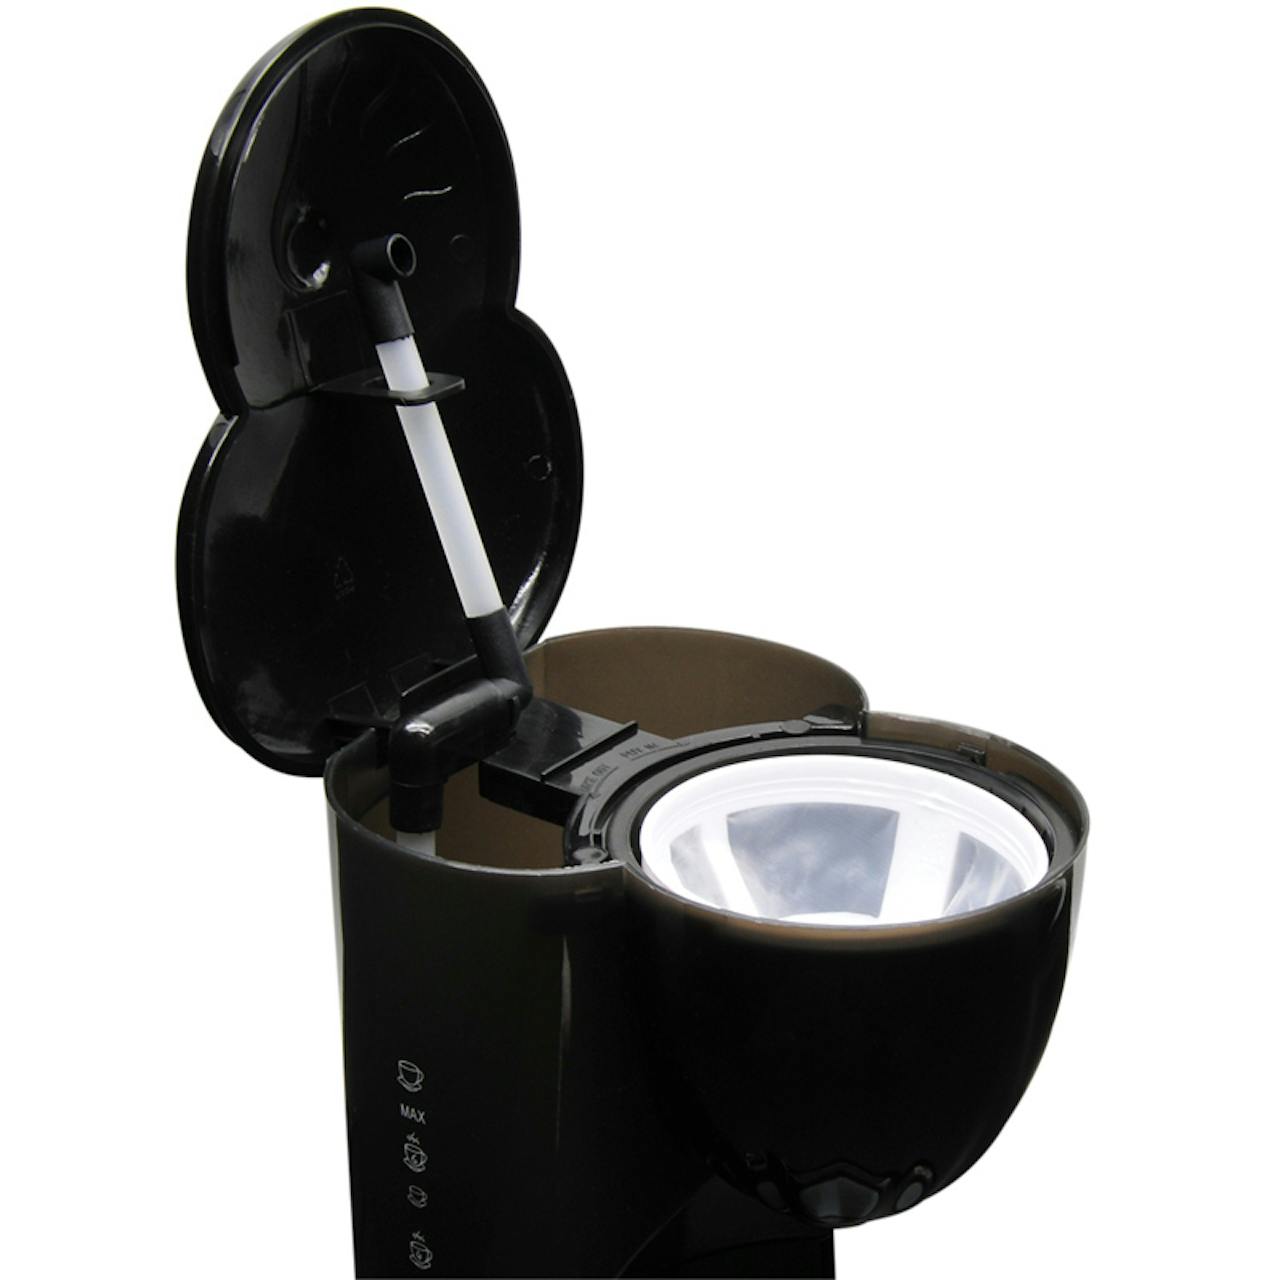 https://raneys-cdn11.imgix.net/images/stencil/original/products/190632/133868/RoadPro-Coffee-Maker-With-Reusable-Filter-And-Scoop-RPSC785__46715.1548352329.jpg?auto=compress,format&w=1280